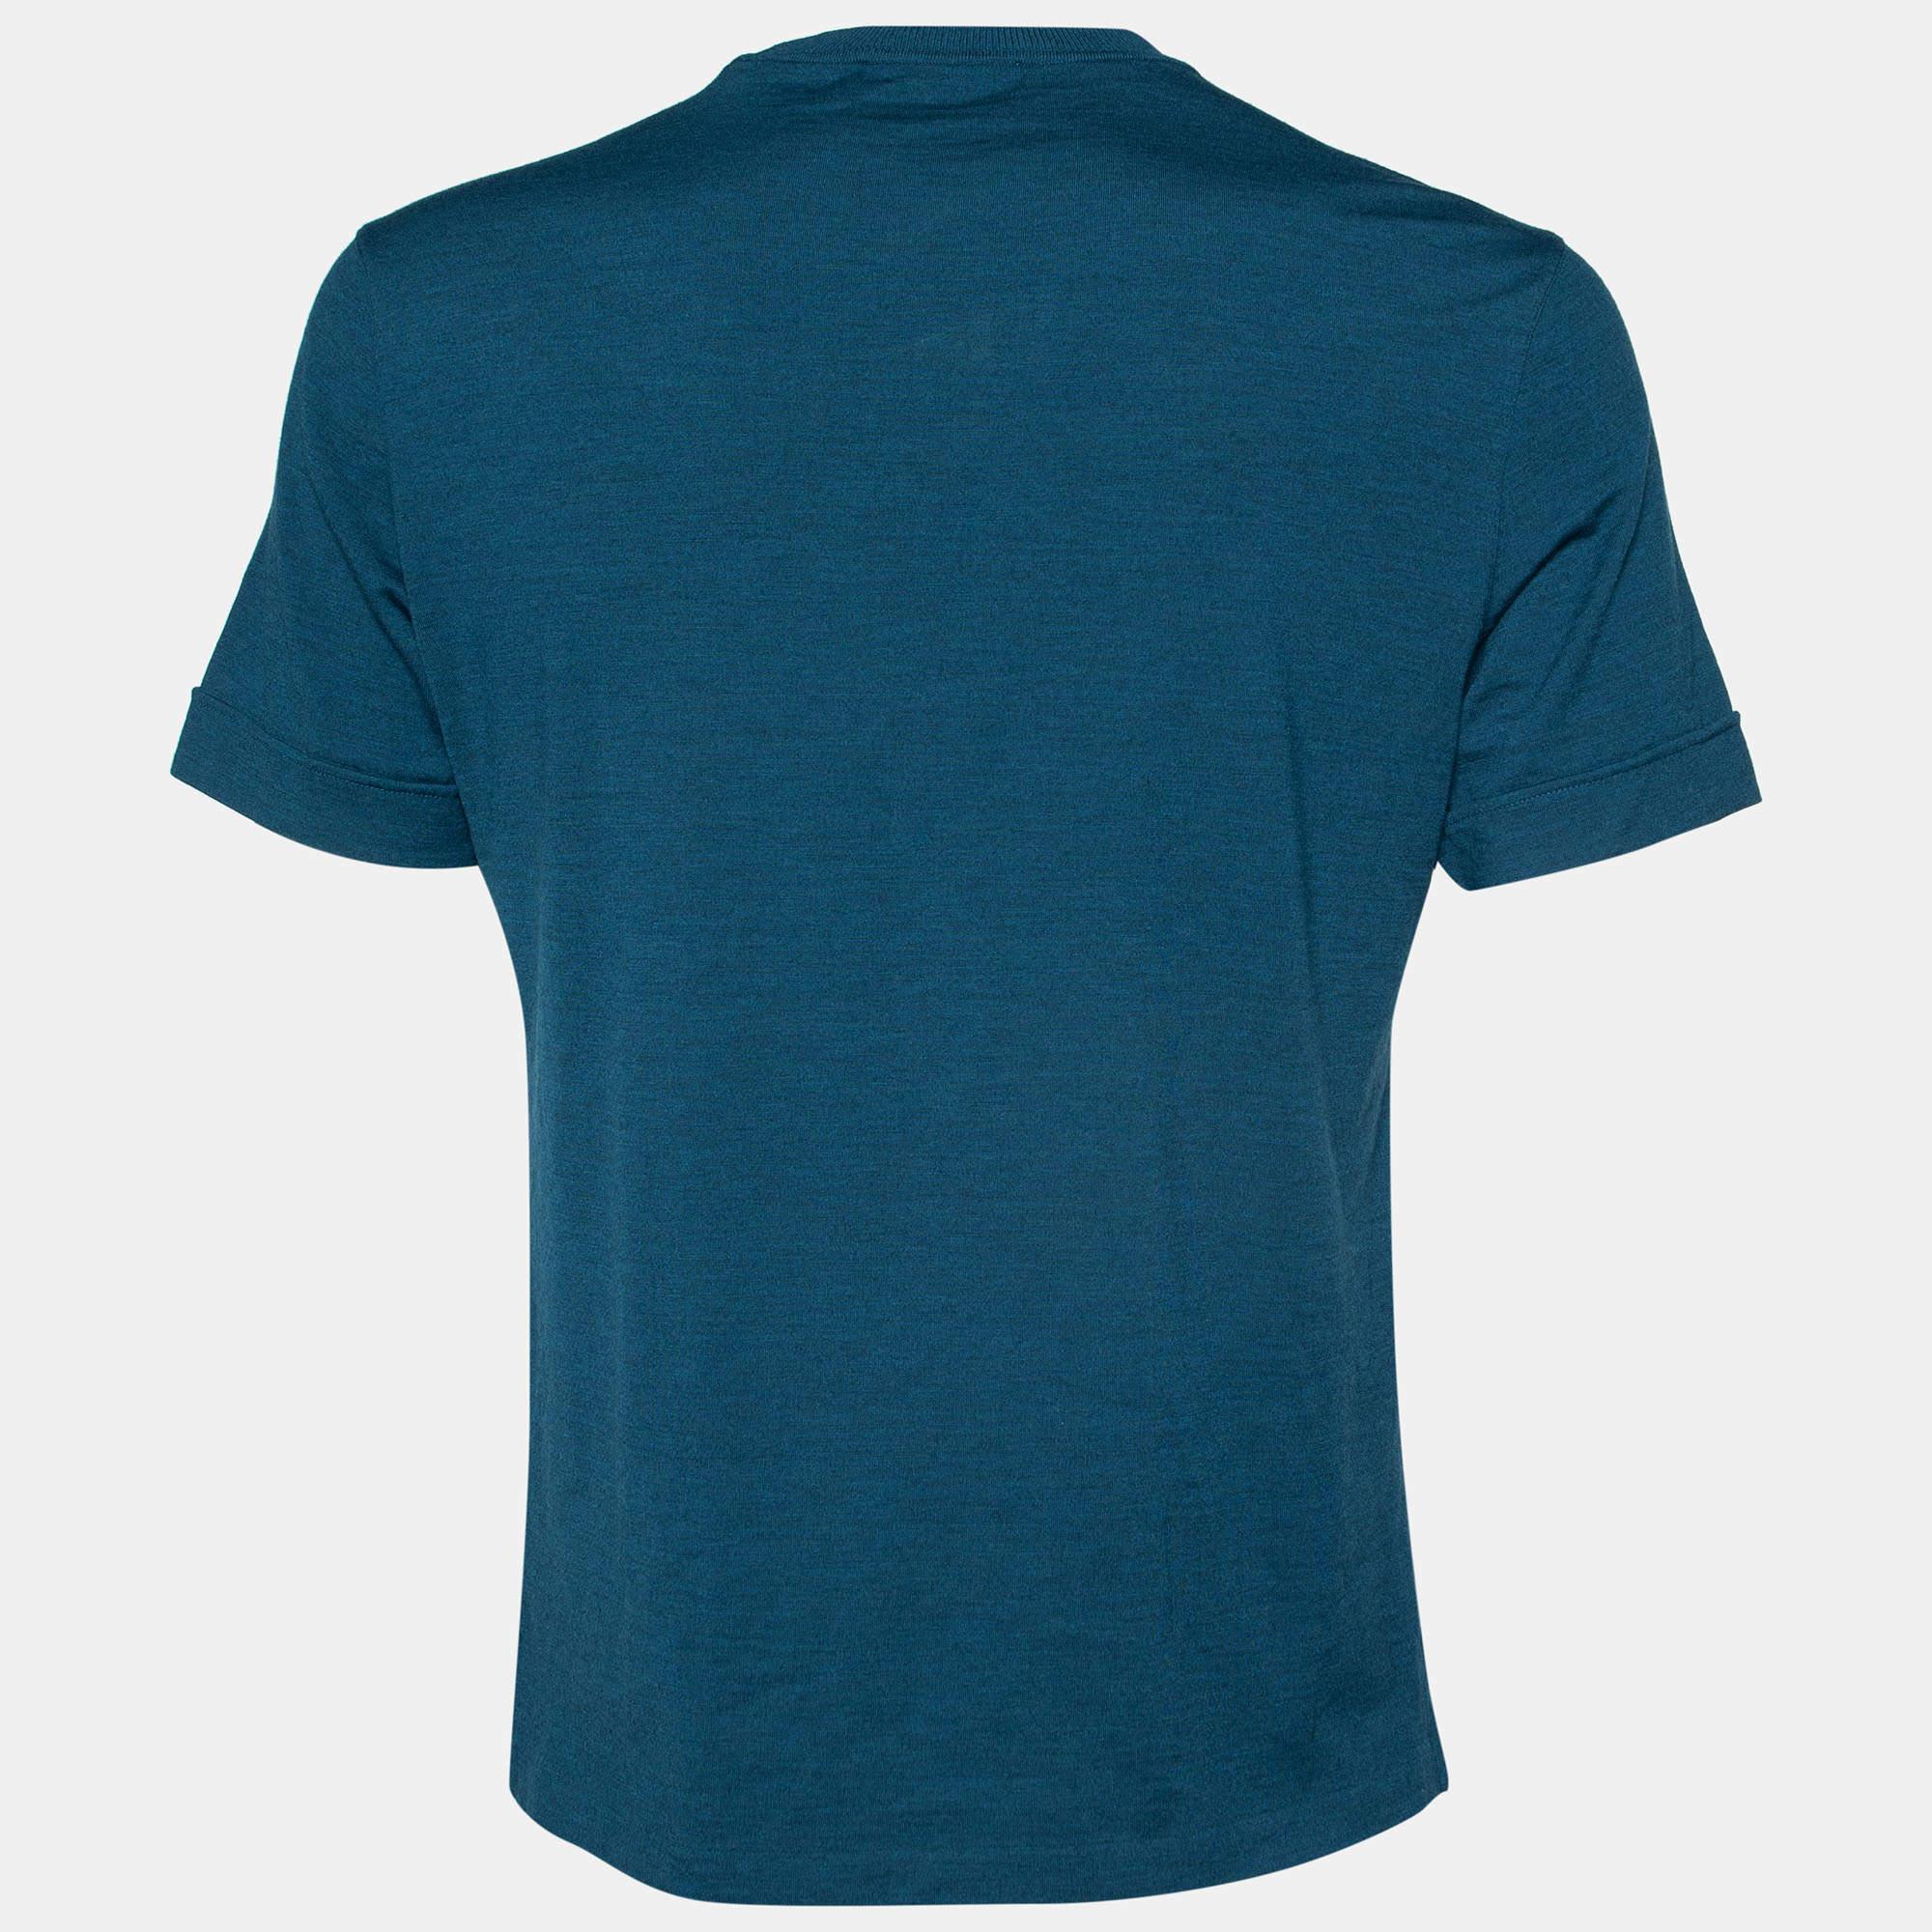 Perfect for casual outings or errands, this T-shirt is the best piece to feel comfortable and stylish in. It flaunts a catchy shade and a relaxed fit.

Includes: Price Tag

